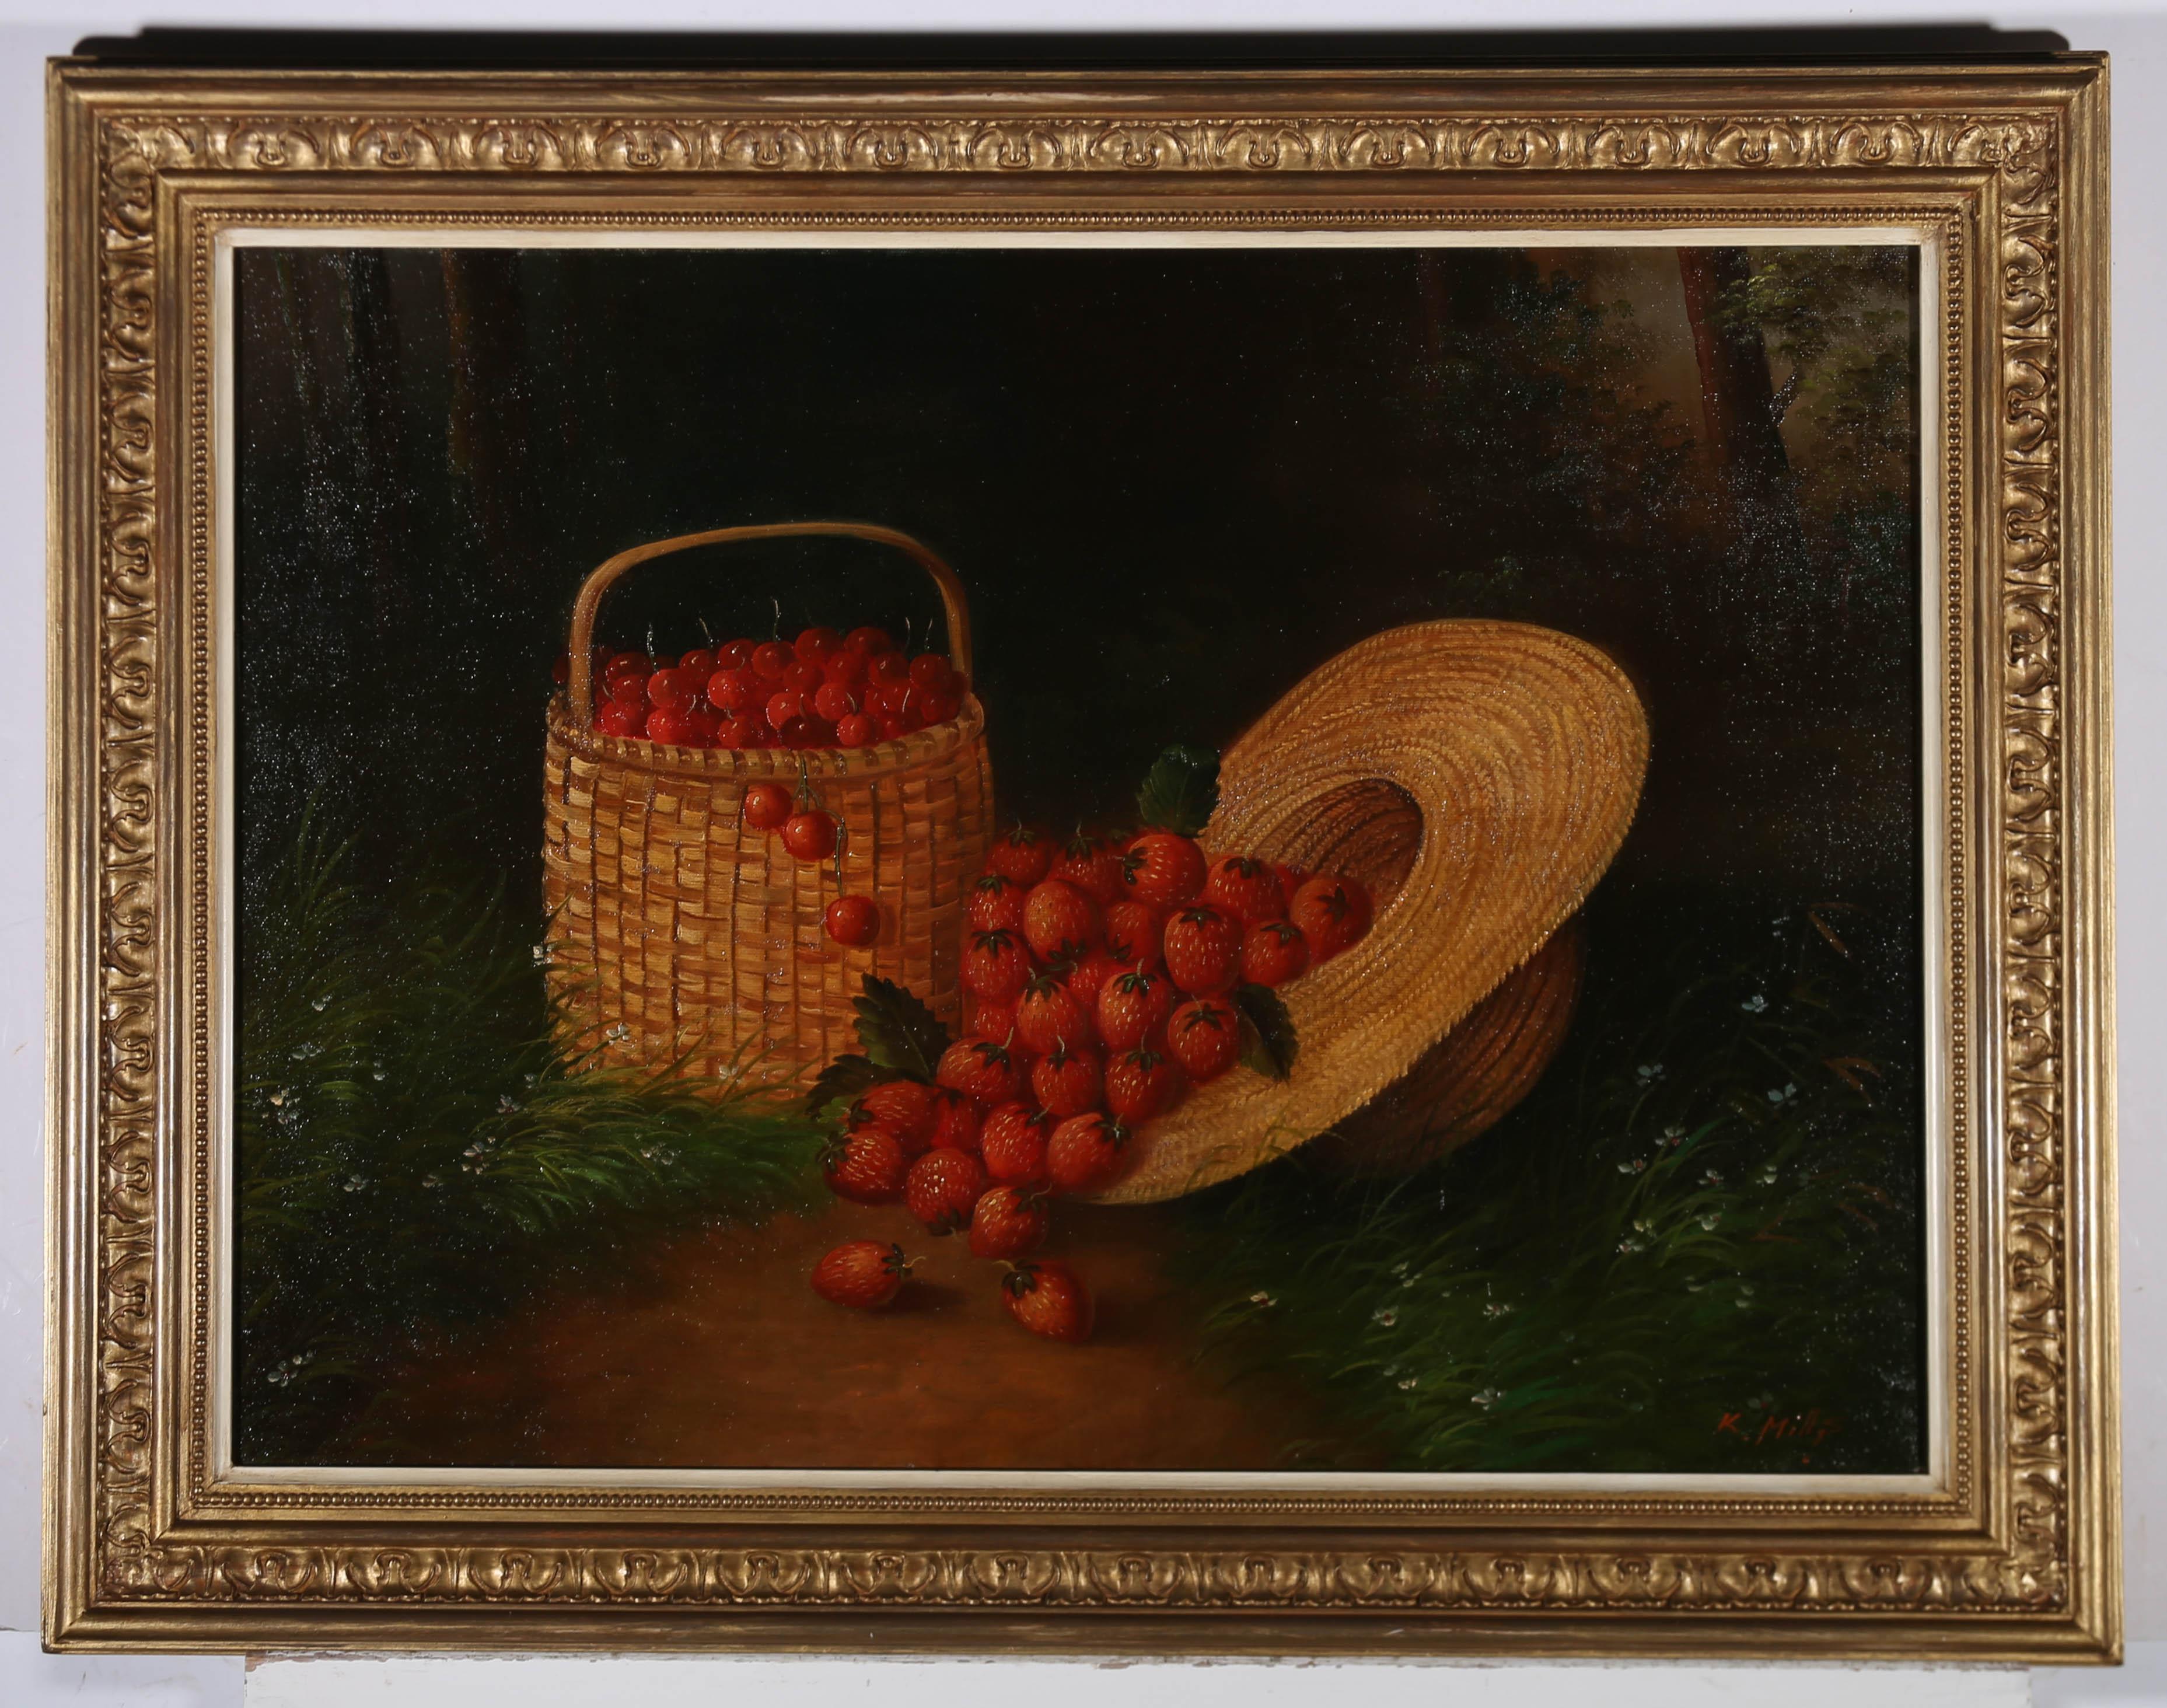 K. Mills - 20th Century Oil, Berries and a Straw Hat 2